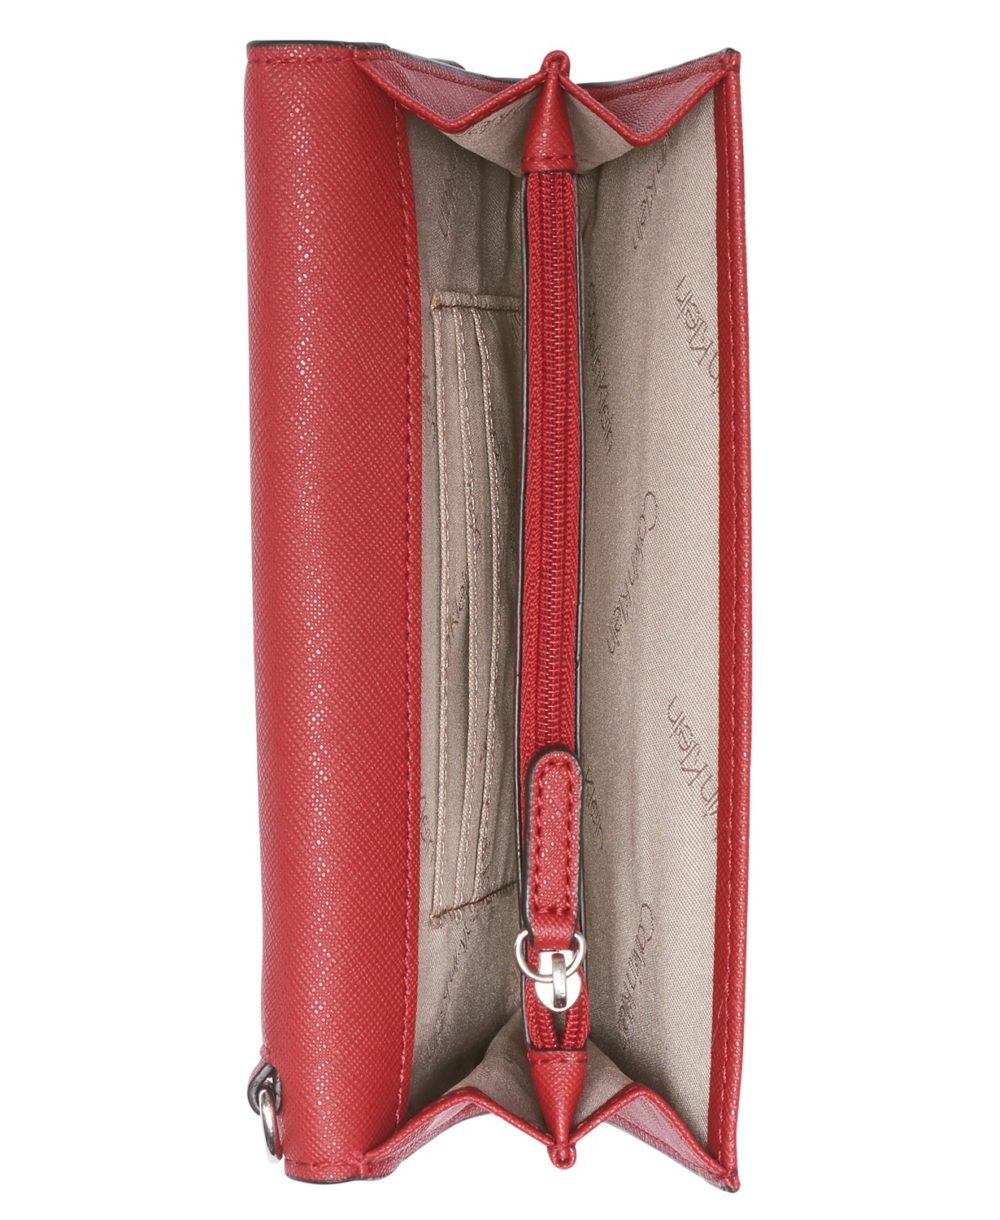 www.couturepoint.com-calvin-klein-womens-red-saffiano-leather-wristlet-wallet